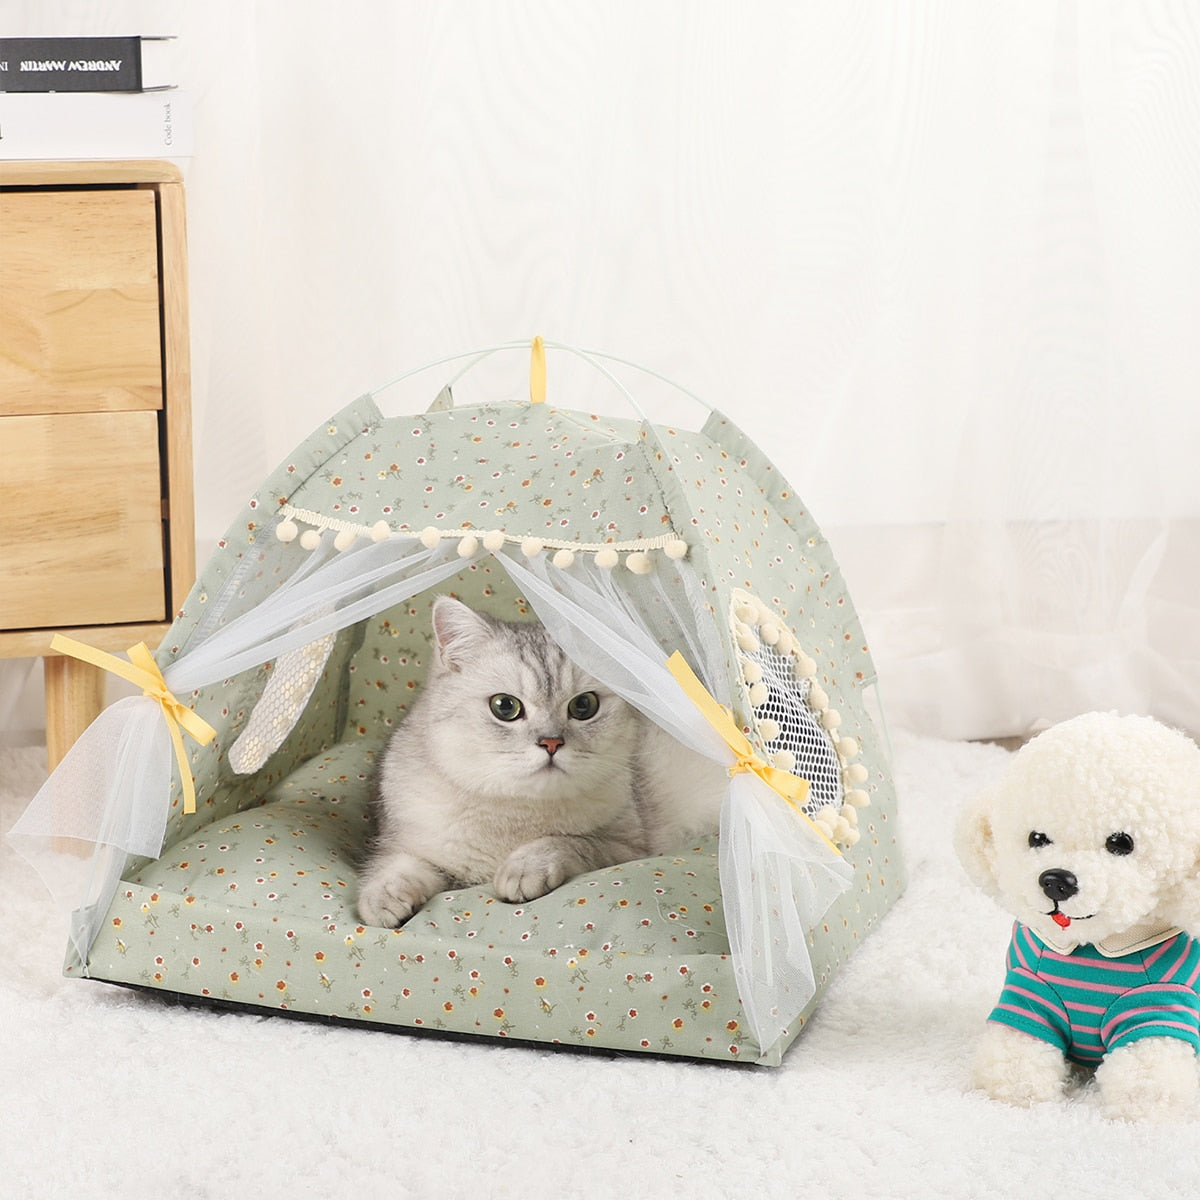 Pet Teepee Tent Bed Cats House